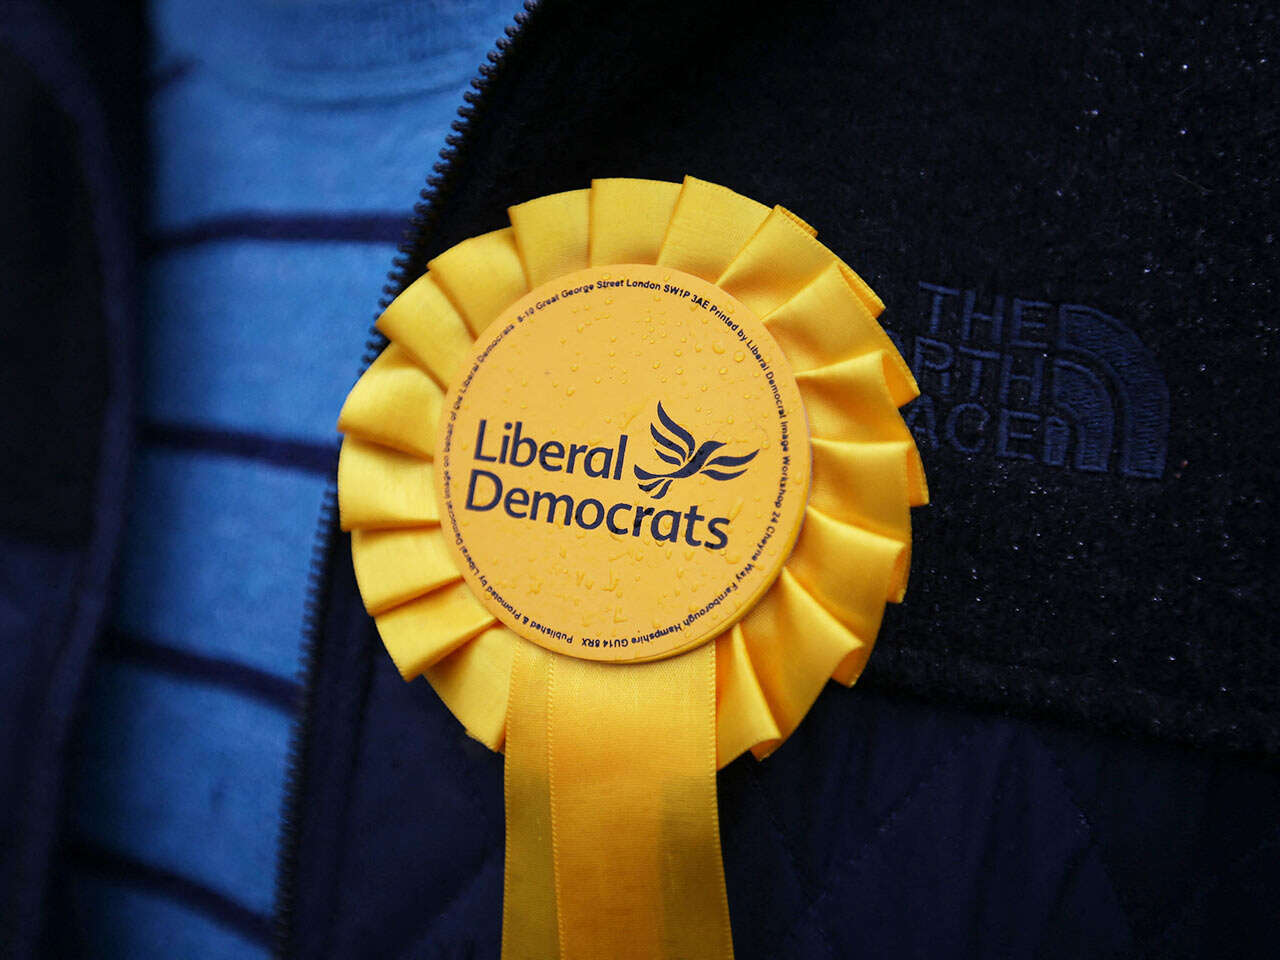 Are the Lib Dems winning here?